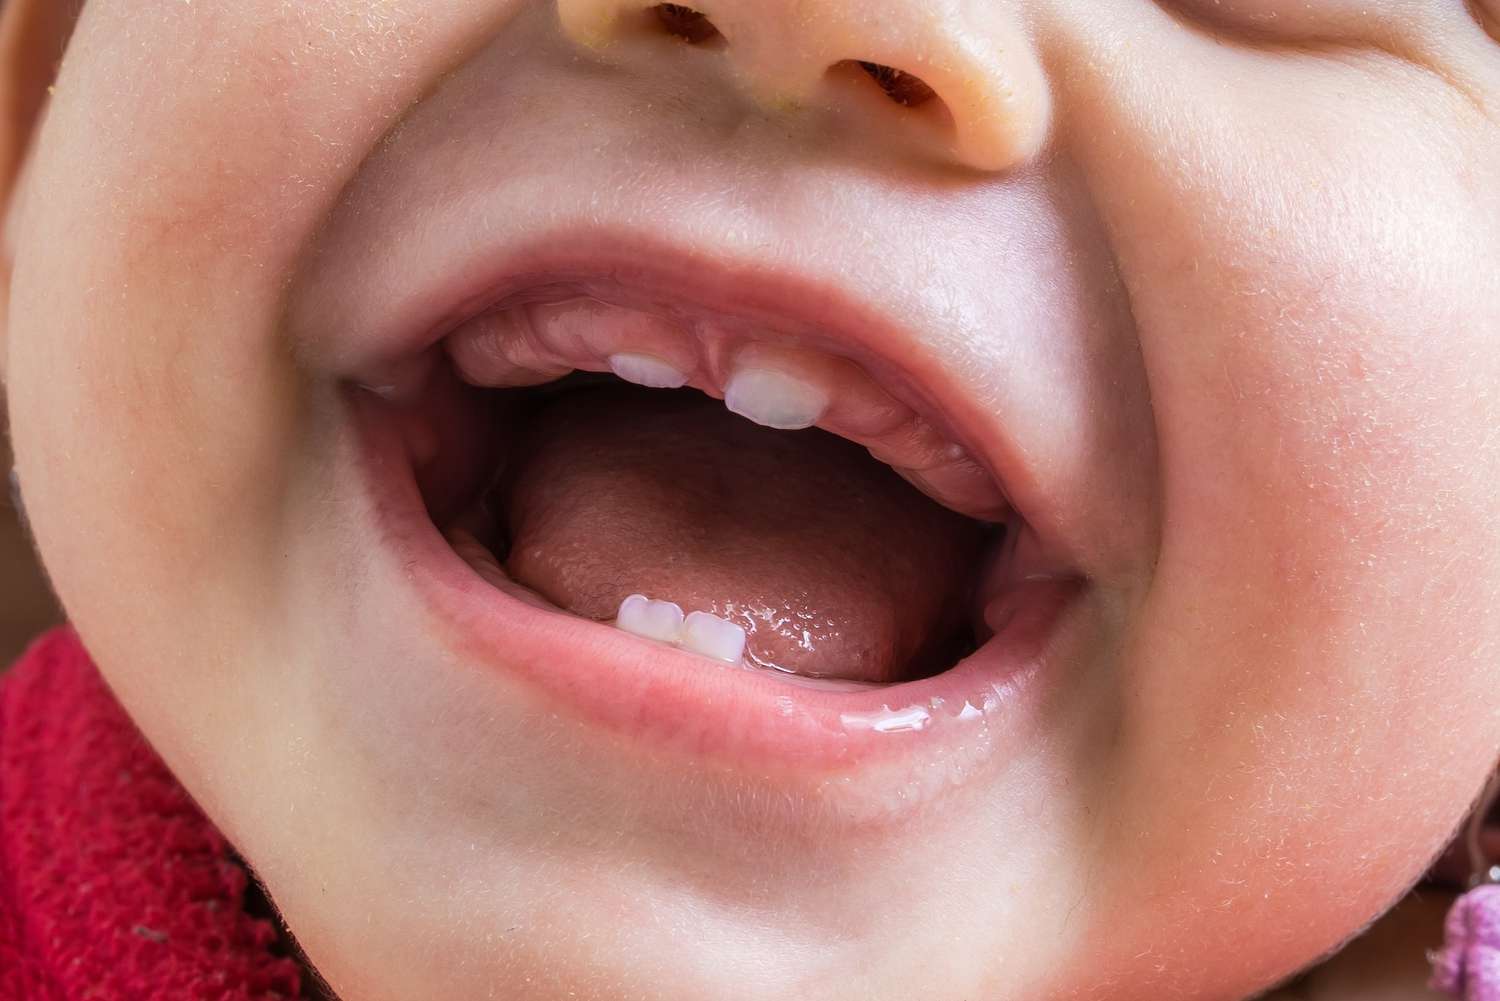 6 Symptoms of Teething and Caring for a Teething Baby